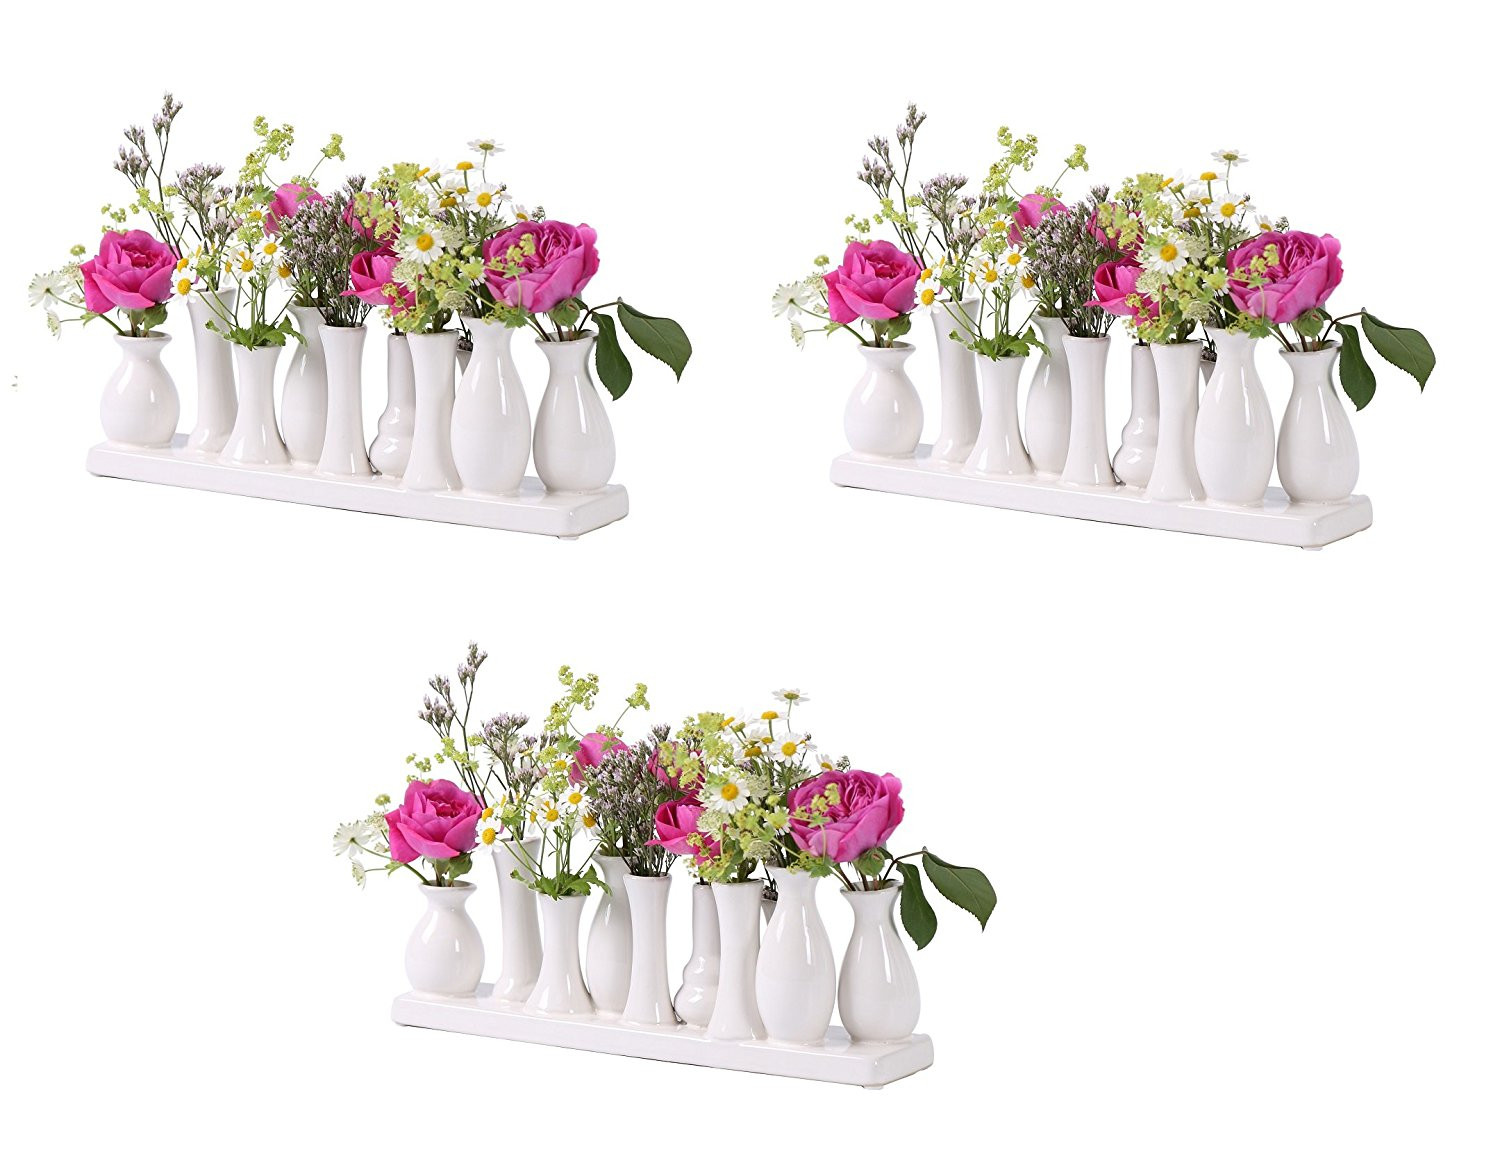 14 attractive Flowers with Vase Free Delivery 2024 free download flowers with vase free delivery of ceramic vase set flower vase ceramic vase colorful white vase pertaining to ceramic vase set flower vase ceramic vase colorful white vase flower plant cera